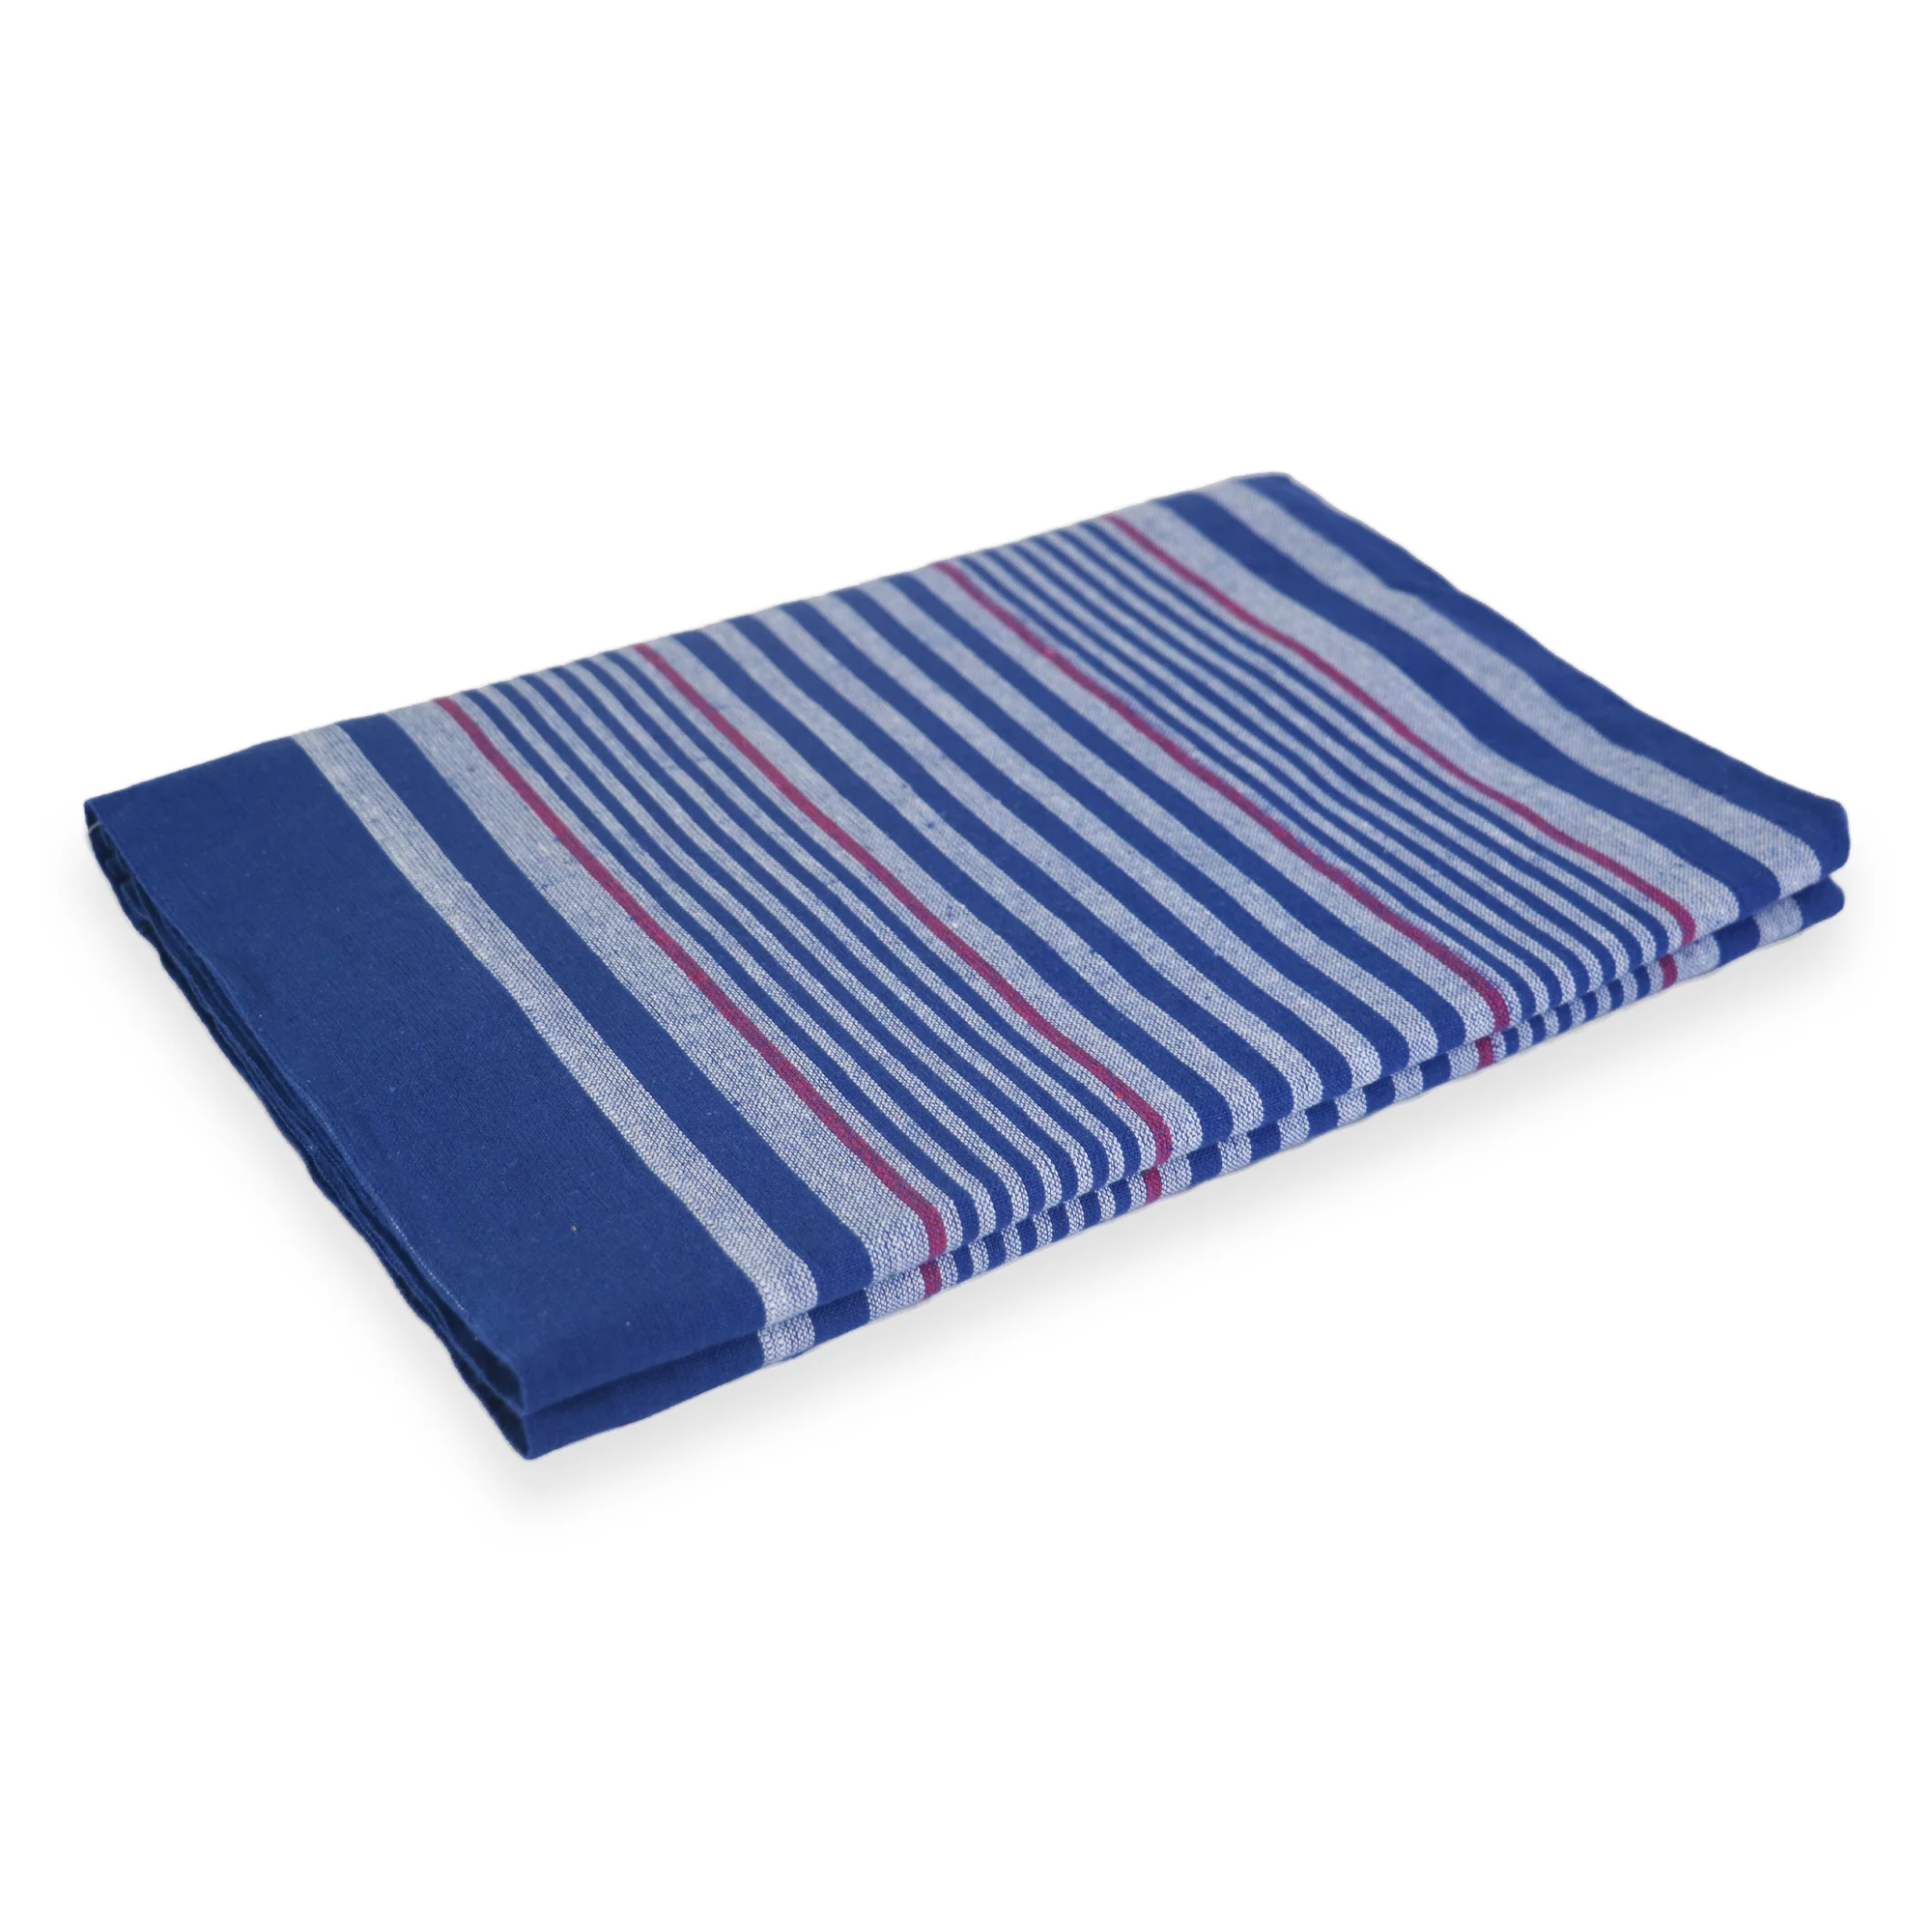 Blue Handloom Cotton Bed Sheets 54x80 (Inches) Light Color for Double, Single Beds